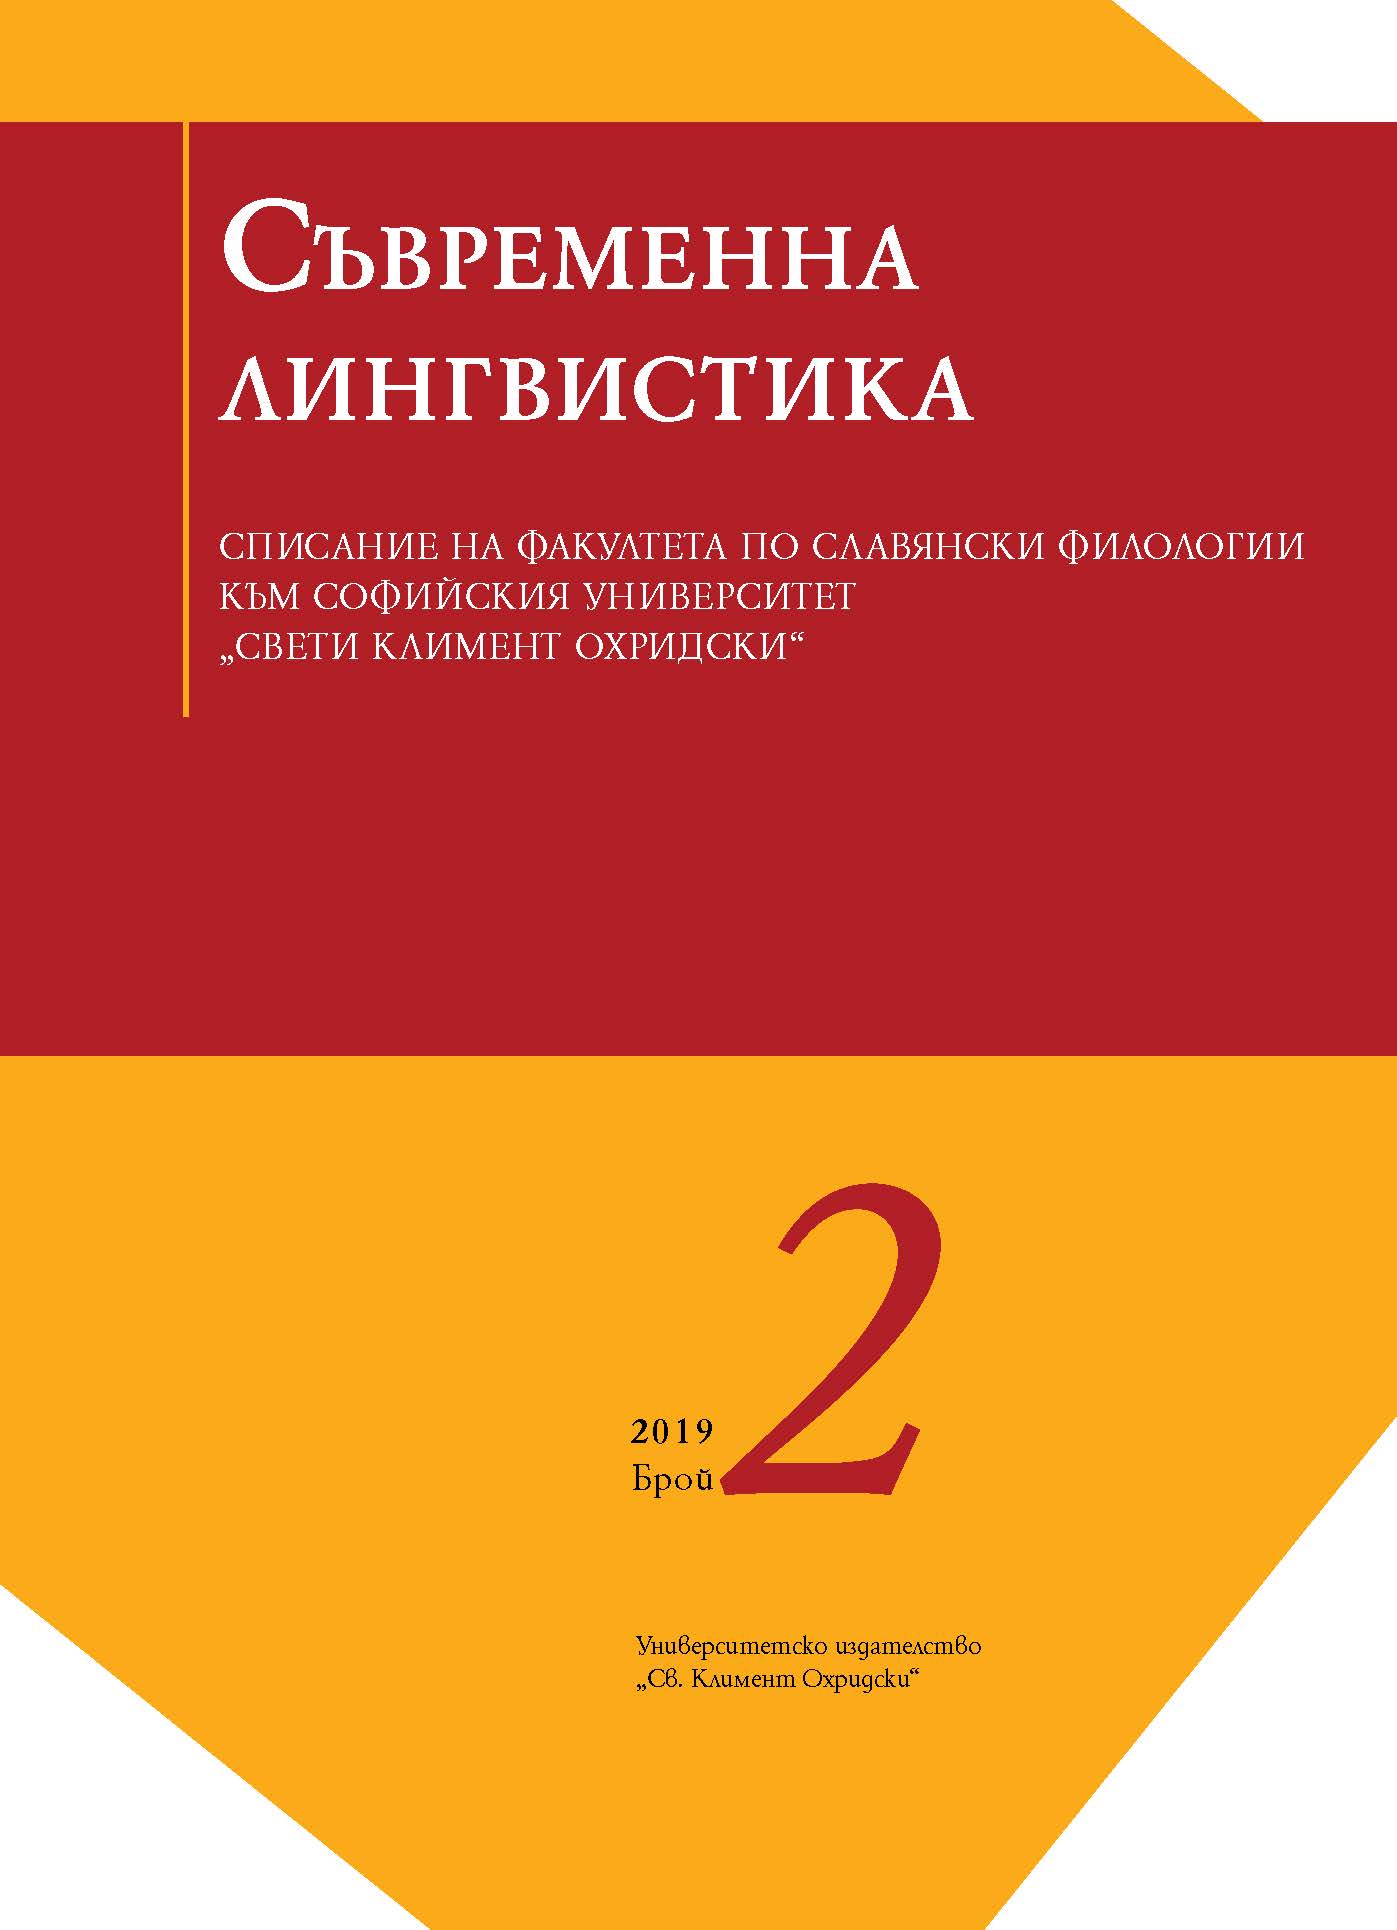 “Saint Clement” Readings for Young Researchers. Volume 1. (Collection of Reports from the Eponymous Scientific Conference). Compiled by D. Atanasova, M. Antonova-Vaptsarova. Sofia: University Press ‘Saint Clement Ohridski’, 2019 Cover Image